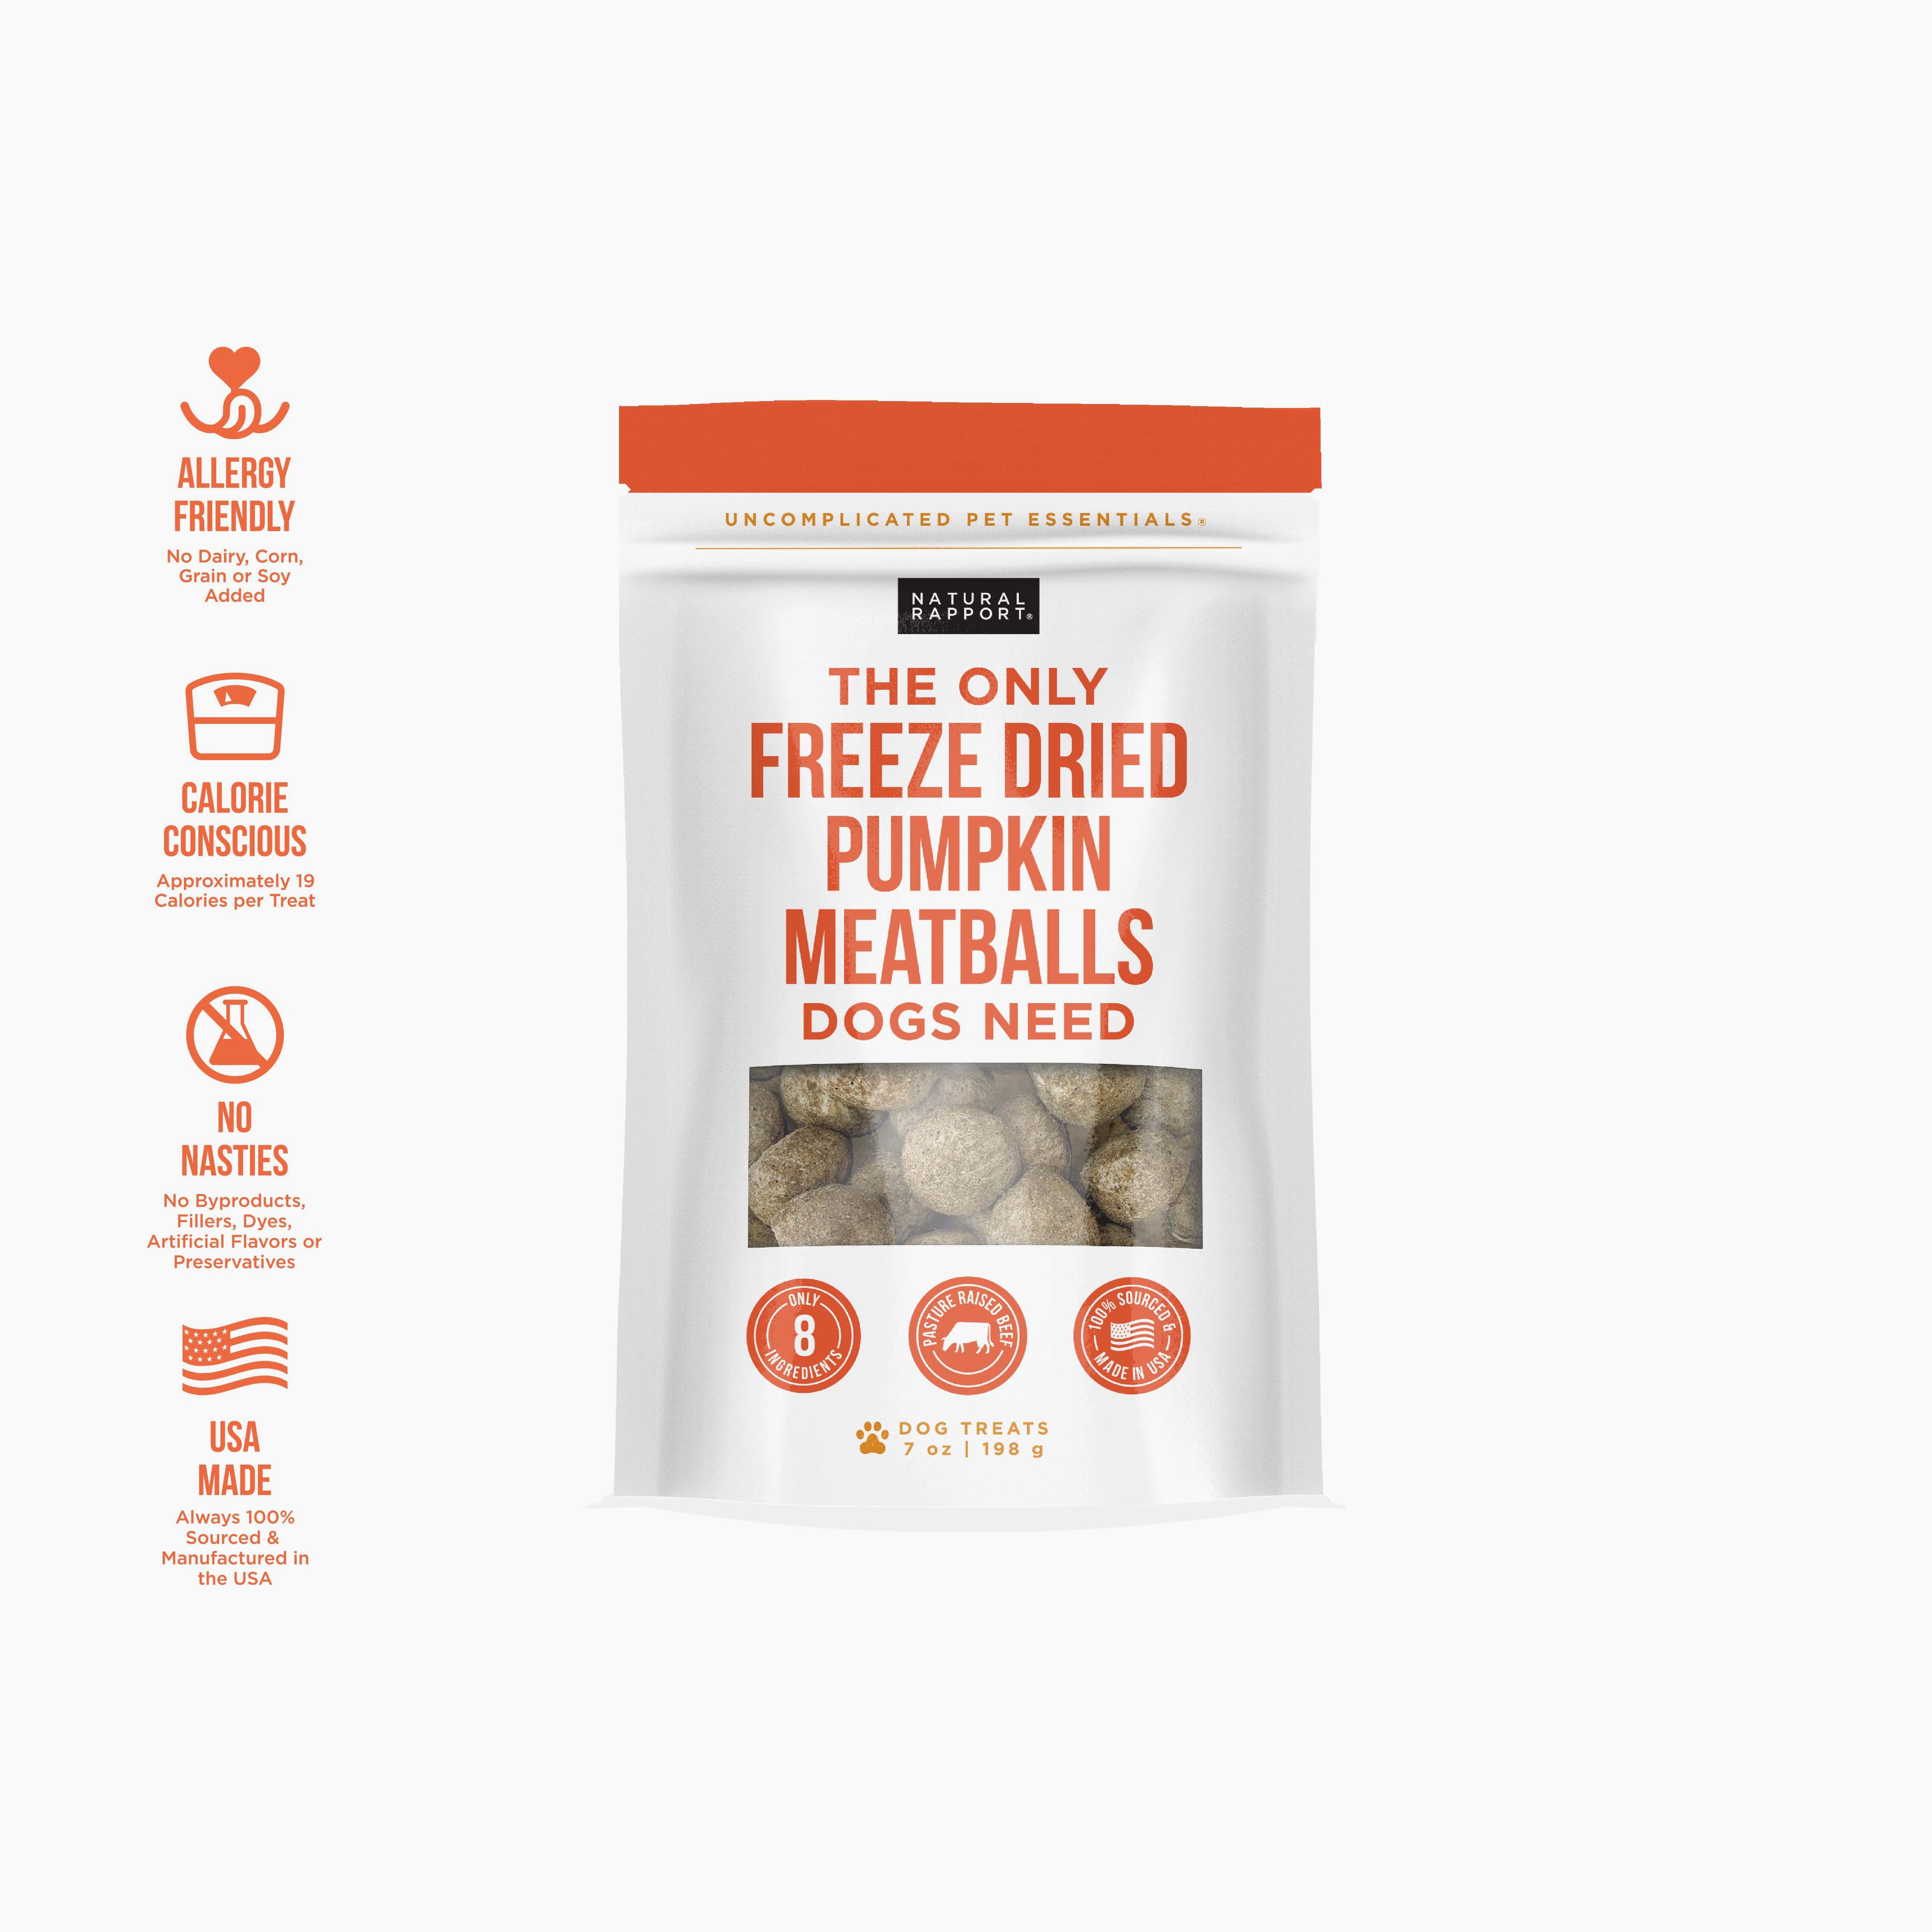 The Only Freeze Dried Pumpkin Meatballs Dogs Need